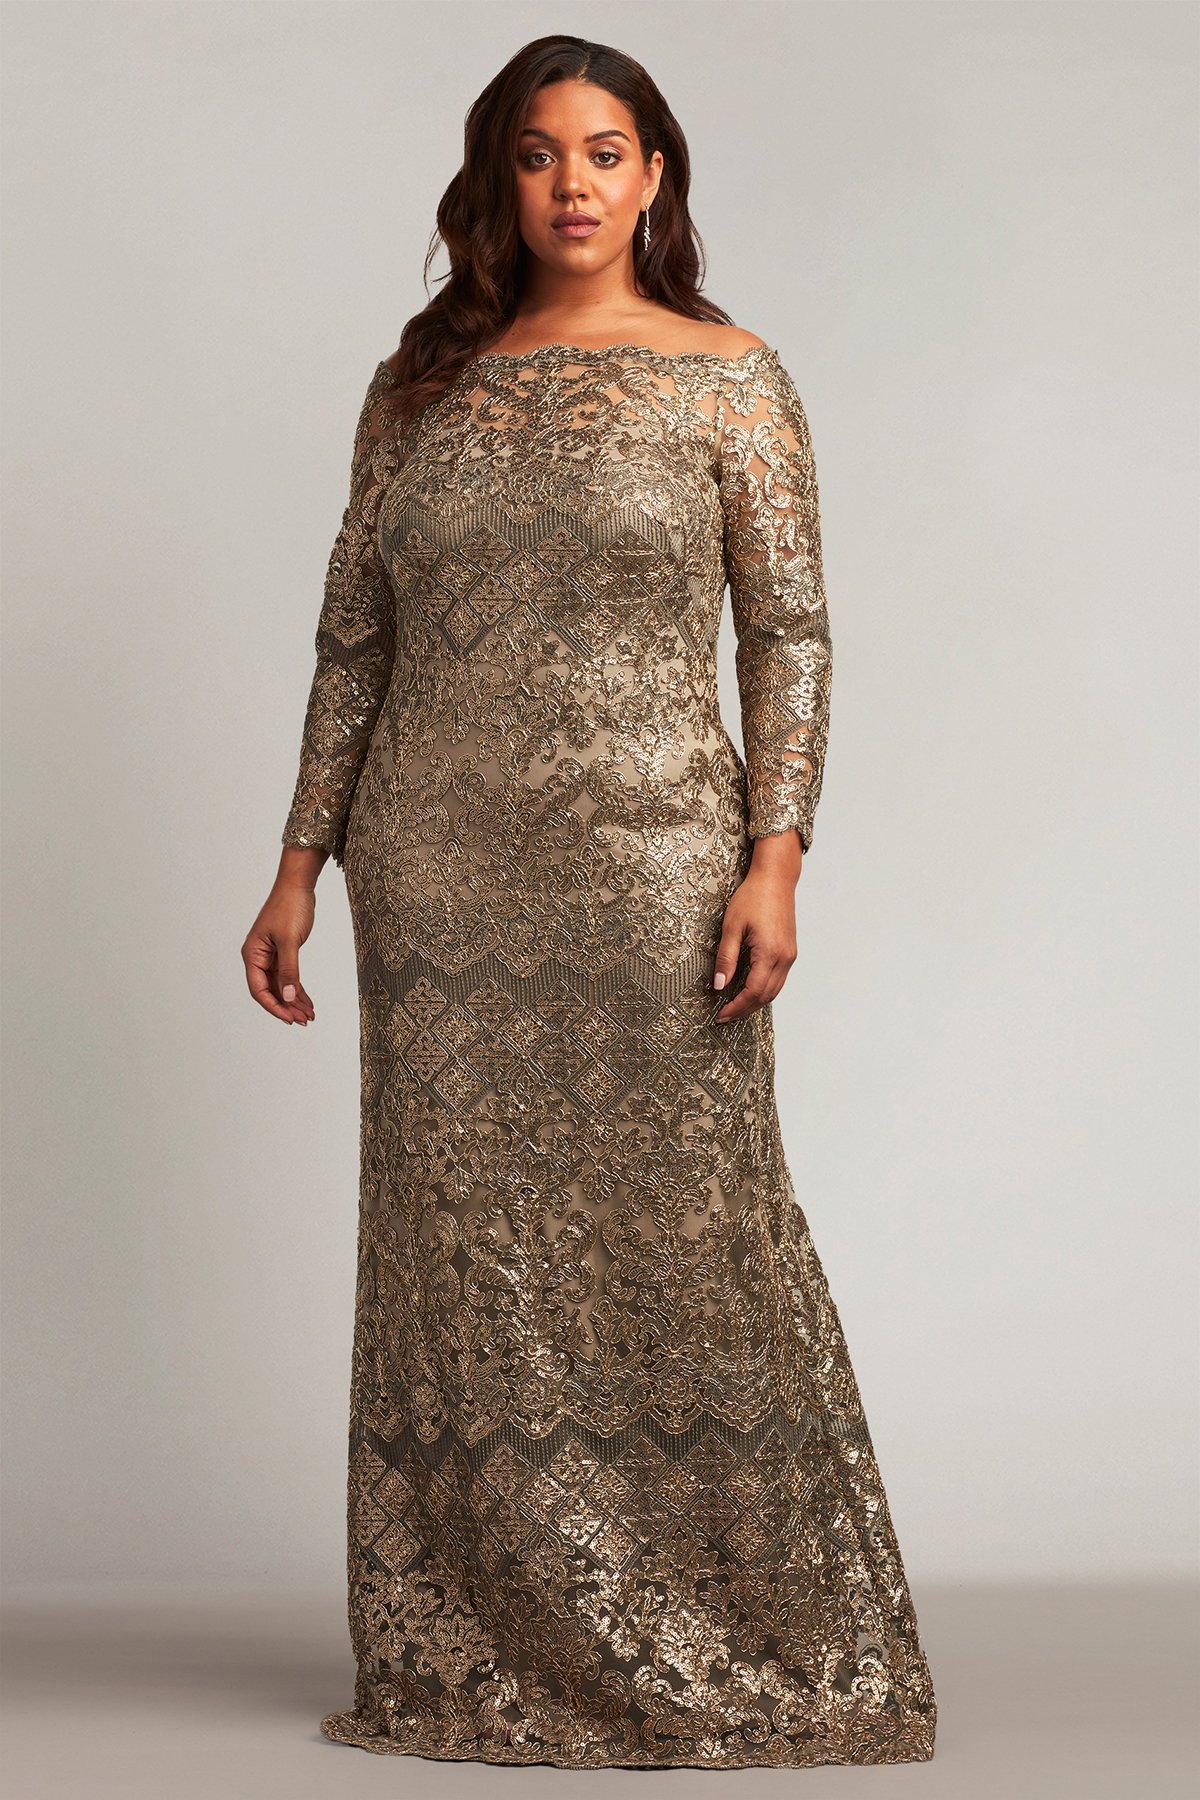 Eve Long-Sleeve Sequin Embroidered Gown - PLUS SIZE